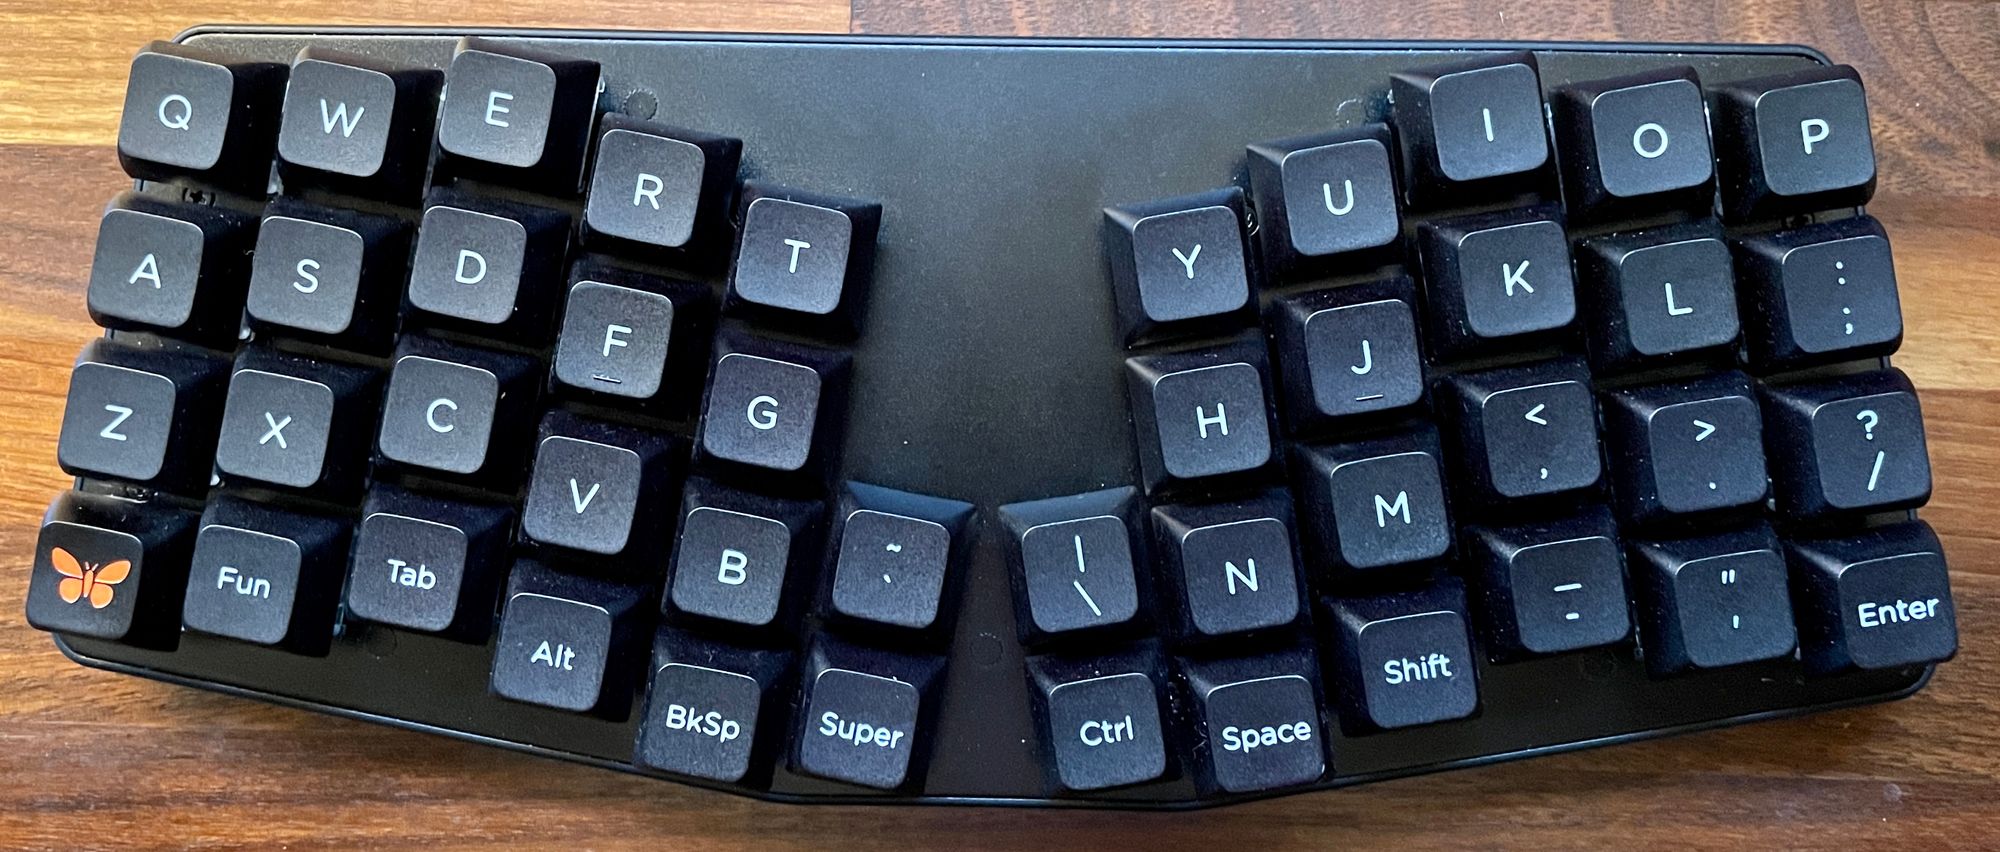 I took off all the keycaps and brushed them, but there's still flecks of stuff on it.